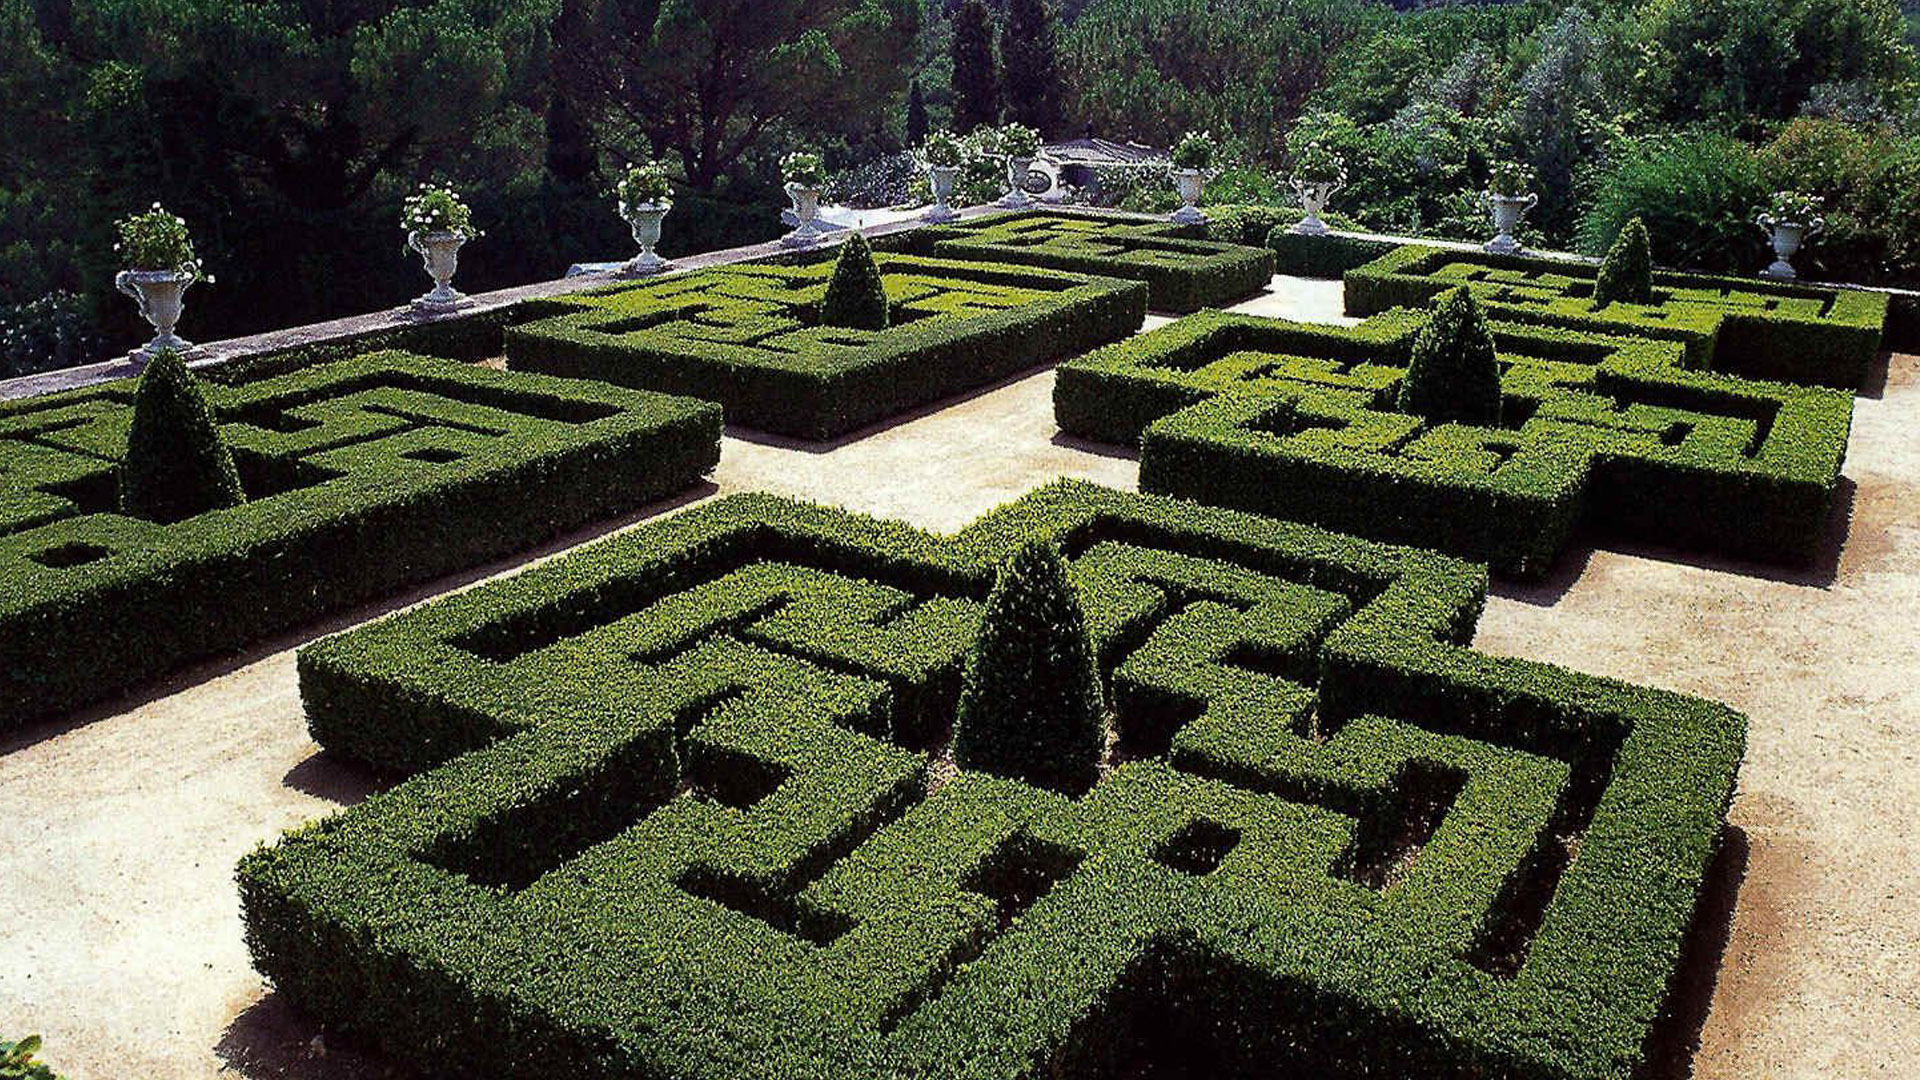 The Great Buildings and Gardens of Portugal